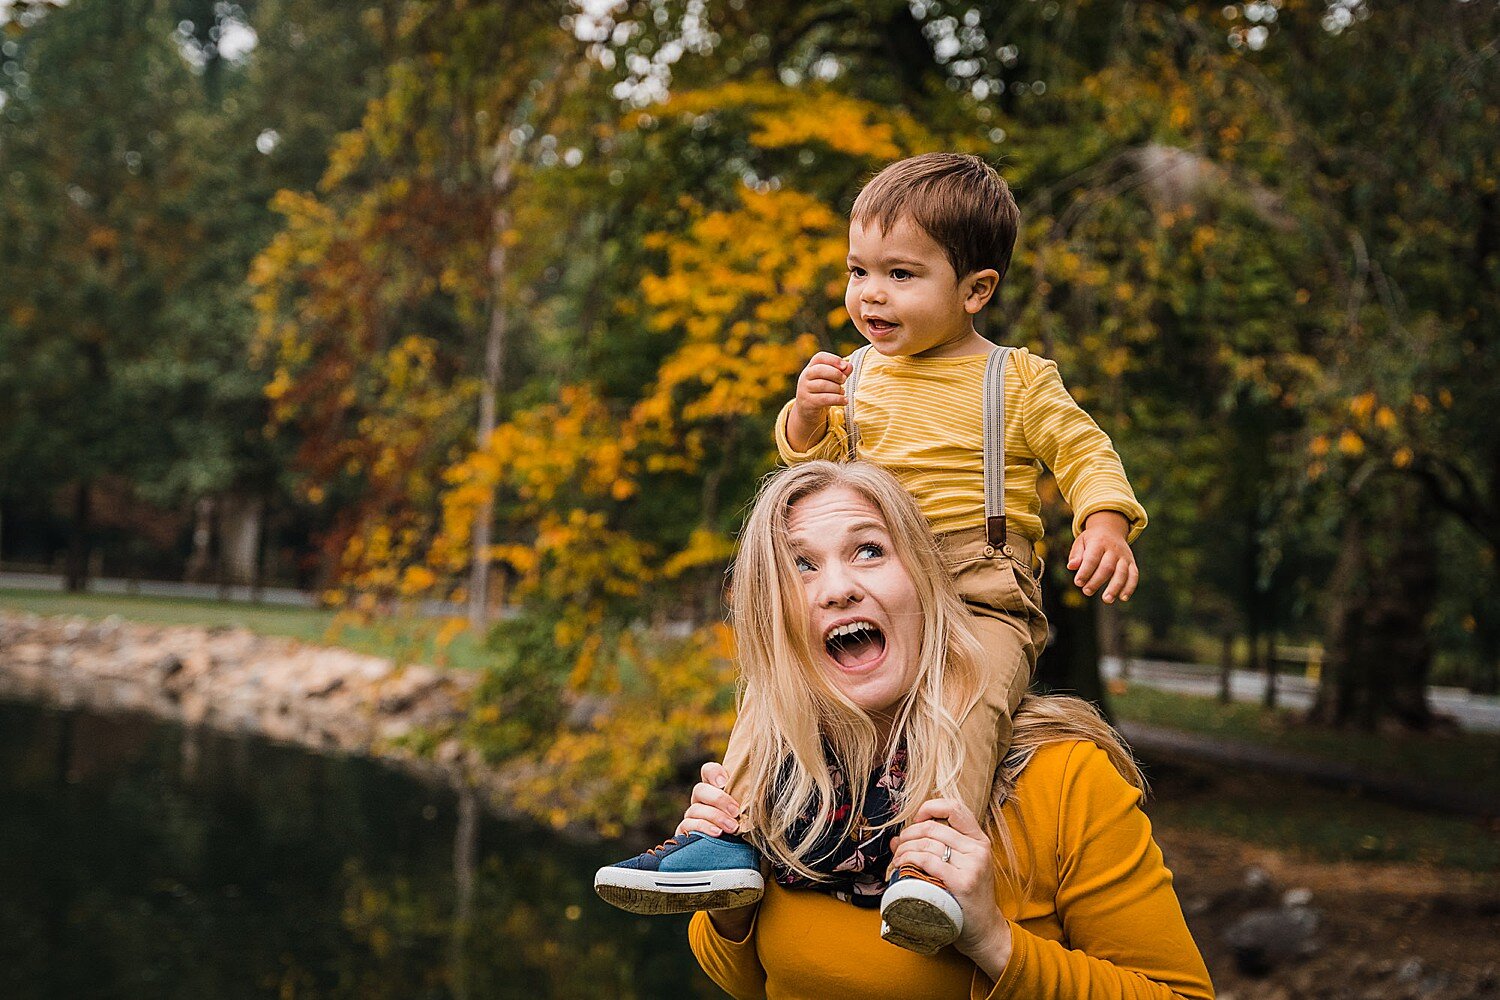 Fall family photo session at Longs Park